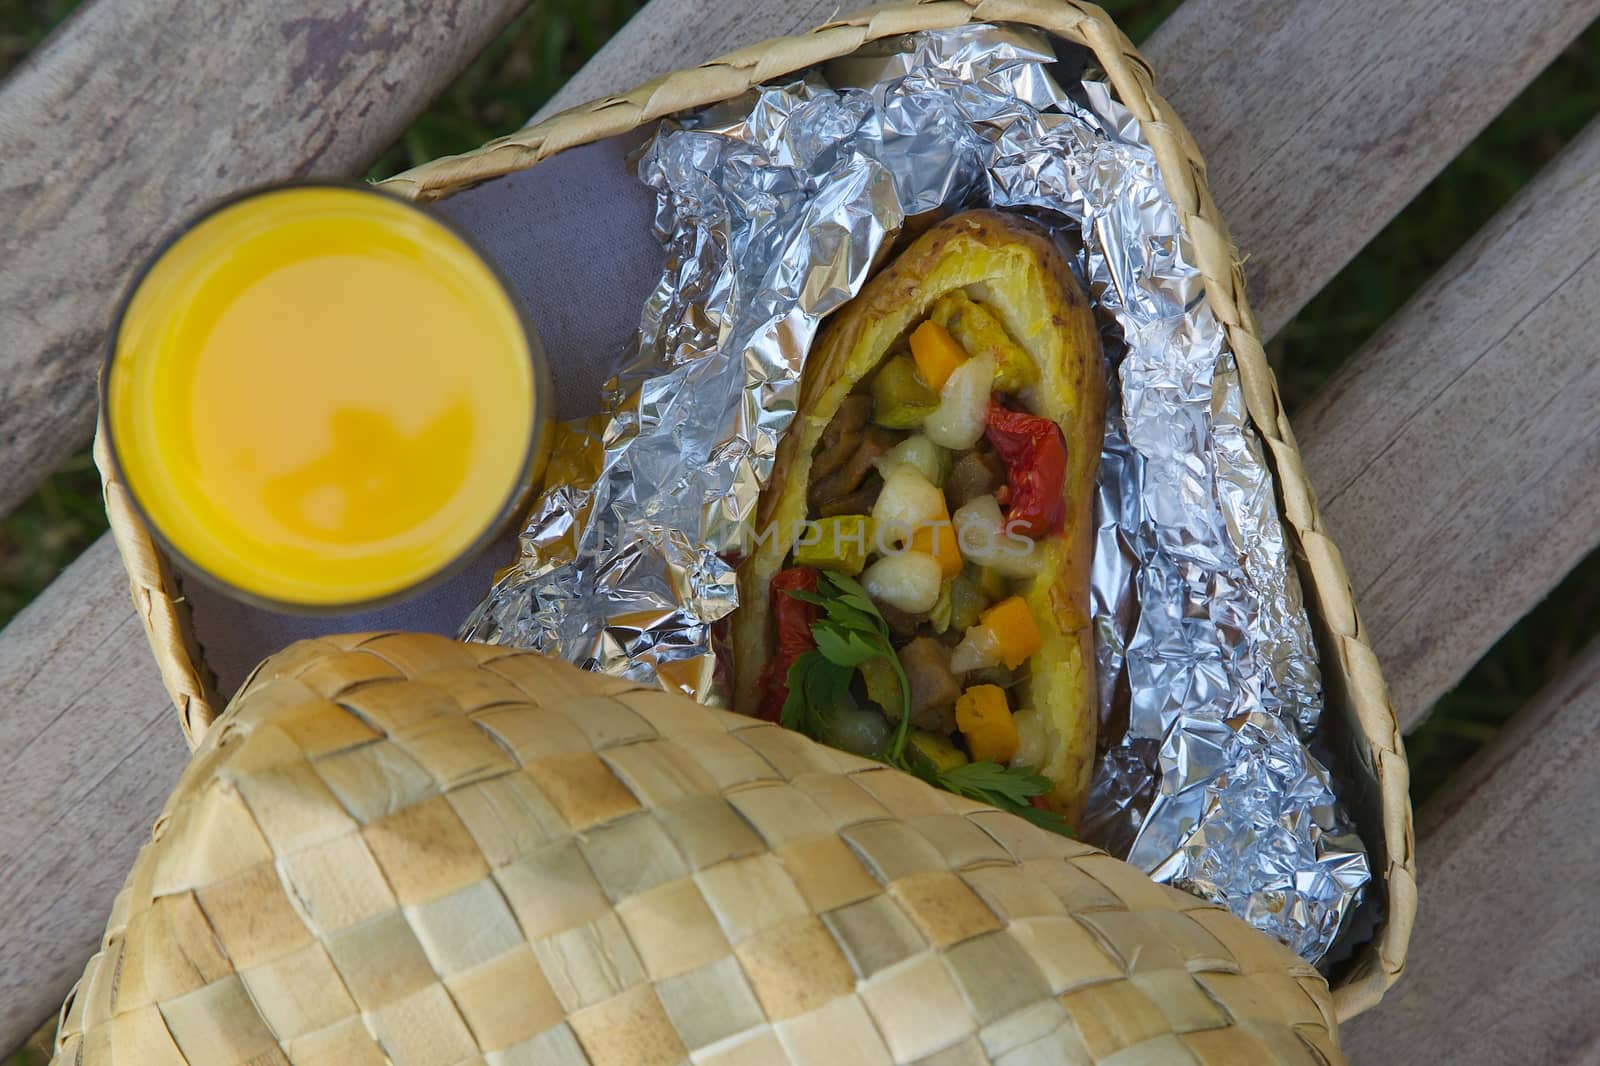 Open-air lunch for a vegetarian- potato baked with vegetables and cheese in an aluminium foil and a glass of fresh orange juice. The lunch is hidden in the woven birch basket